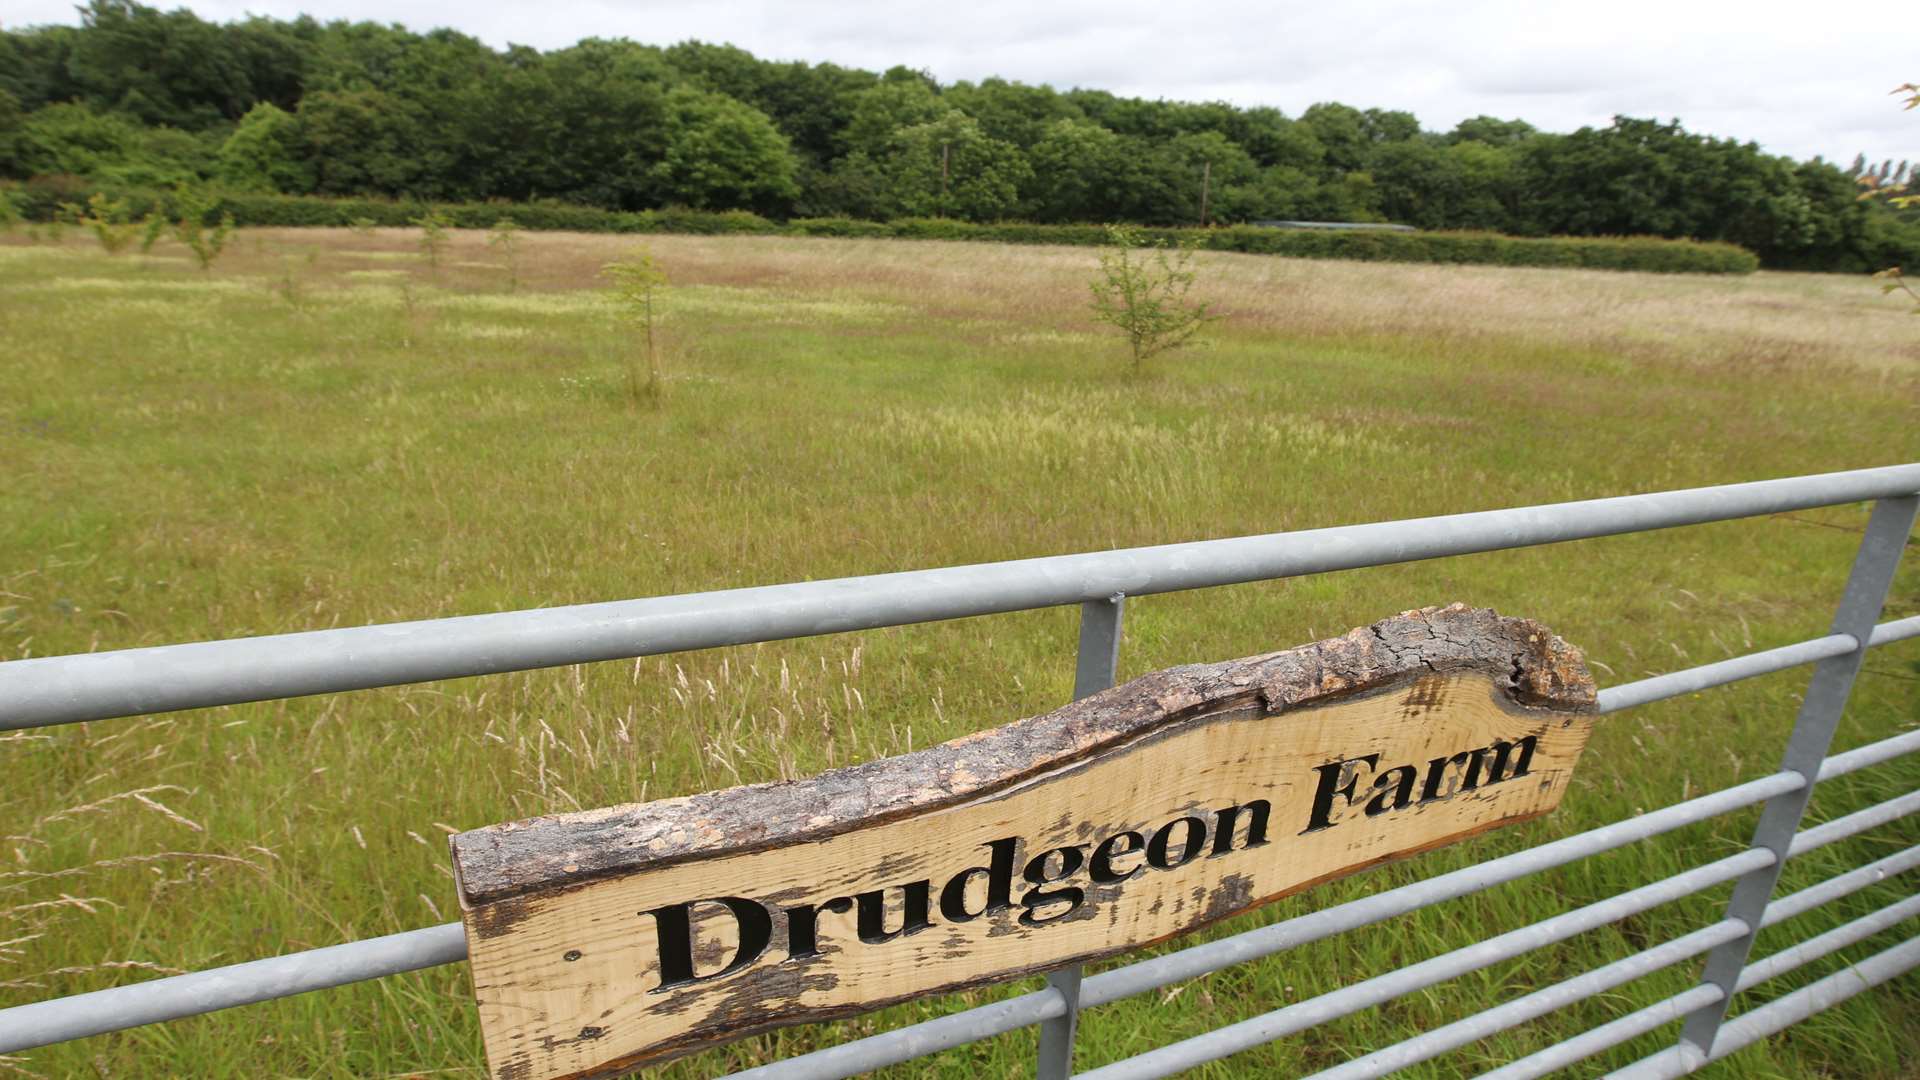 A plot of land at Drudgeon Farm, is subject to a planning application to turn into a permanent site for travellers in Bean, Dartford.